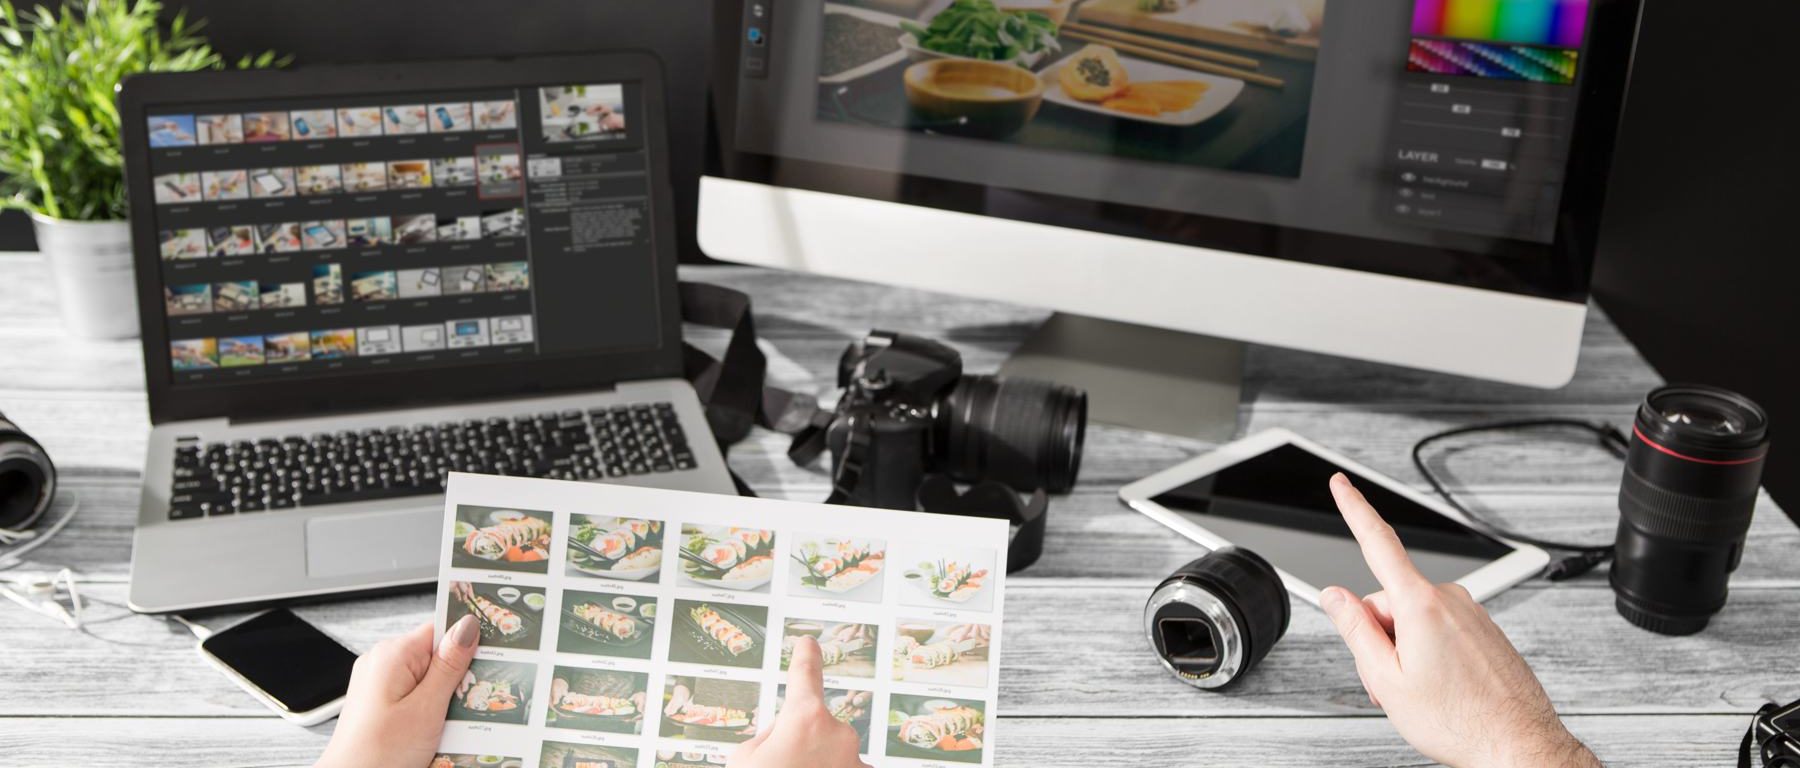 Best Photo Editing Software of 2019 | TechRev.me